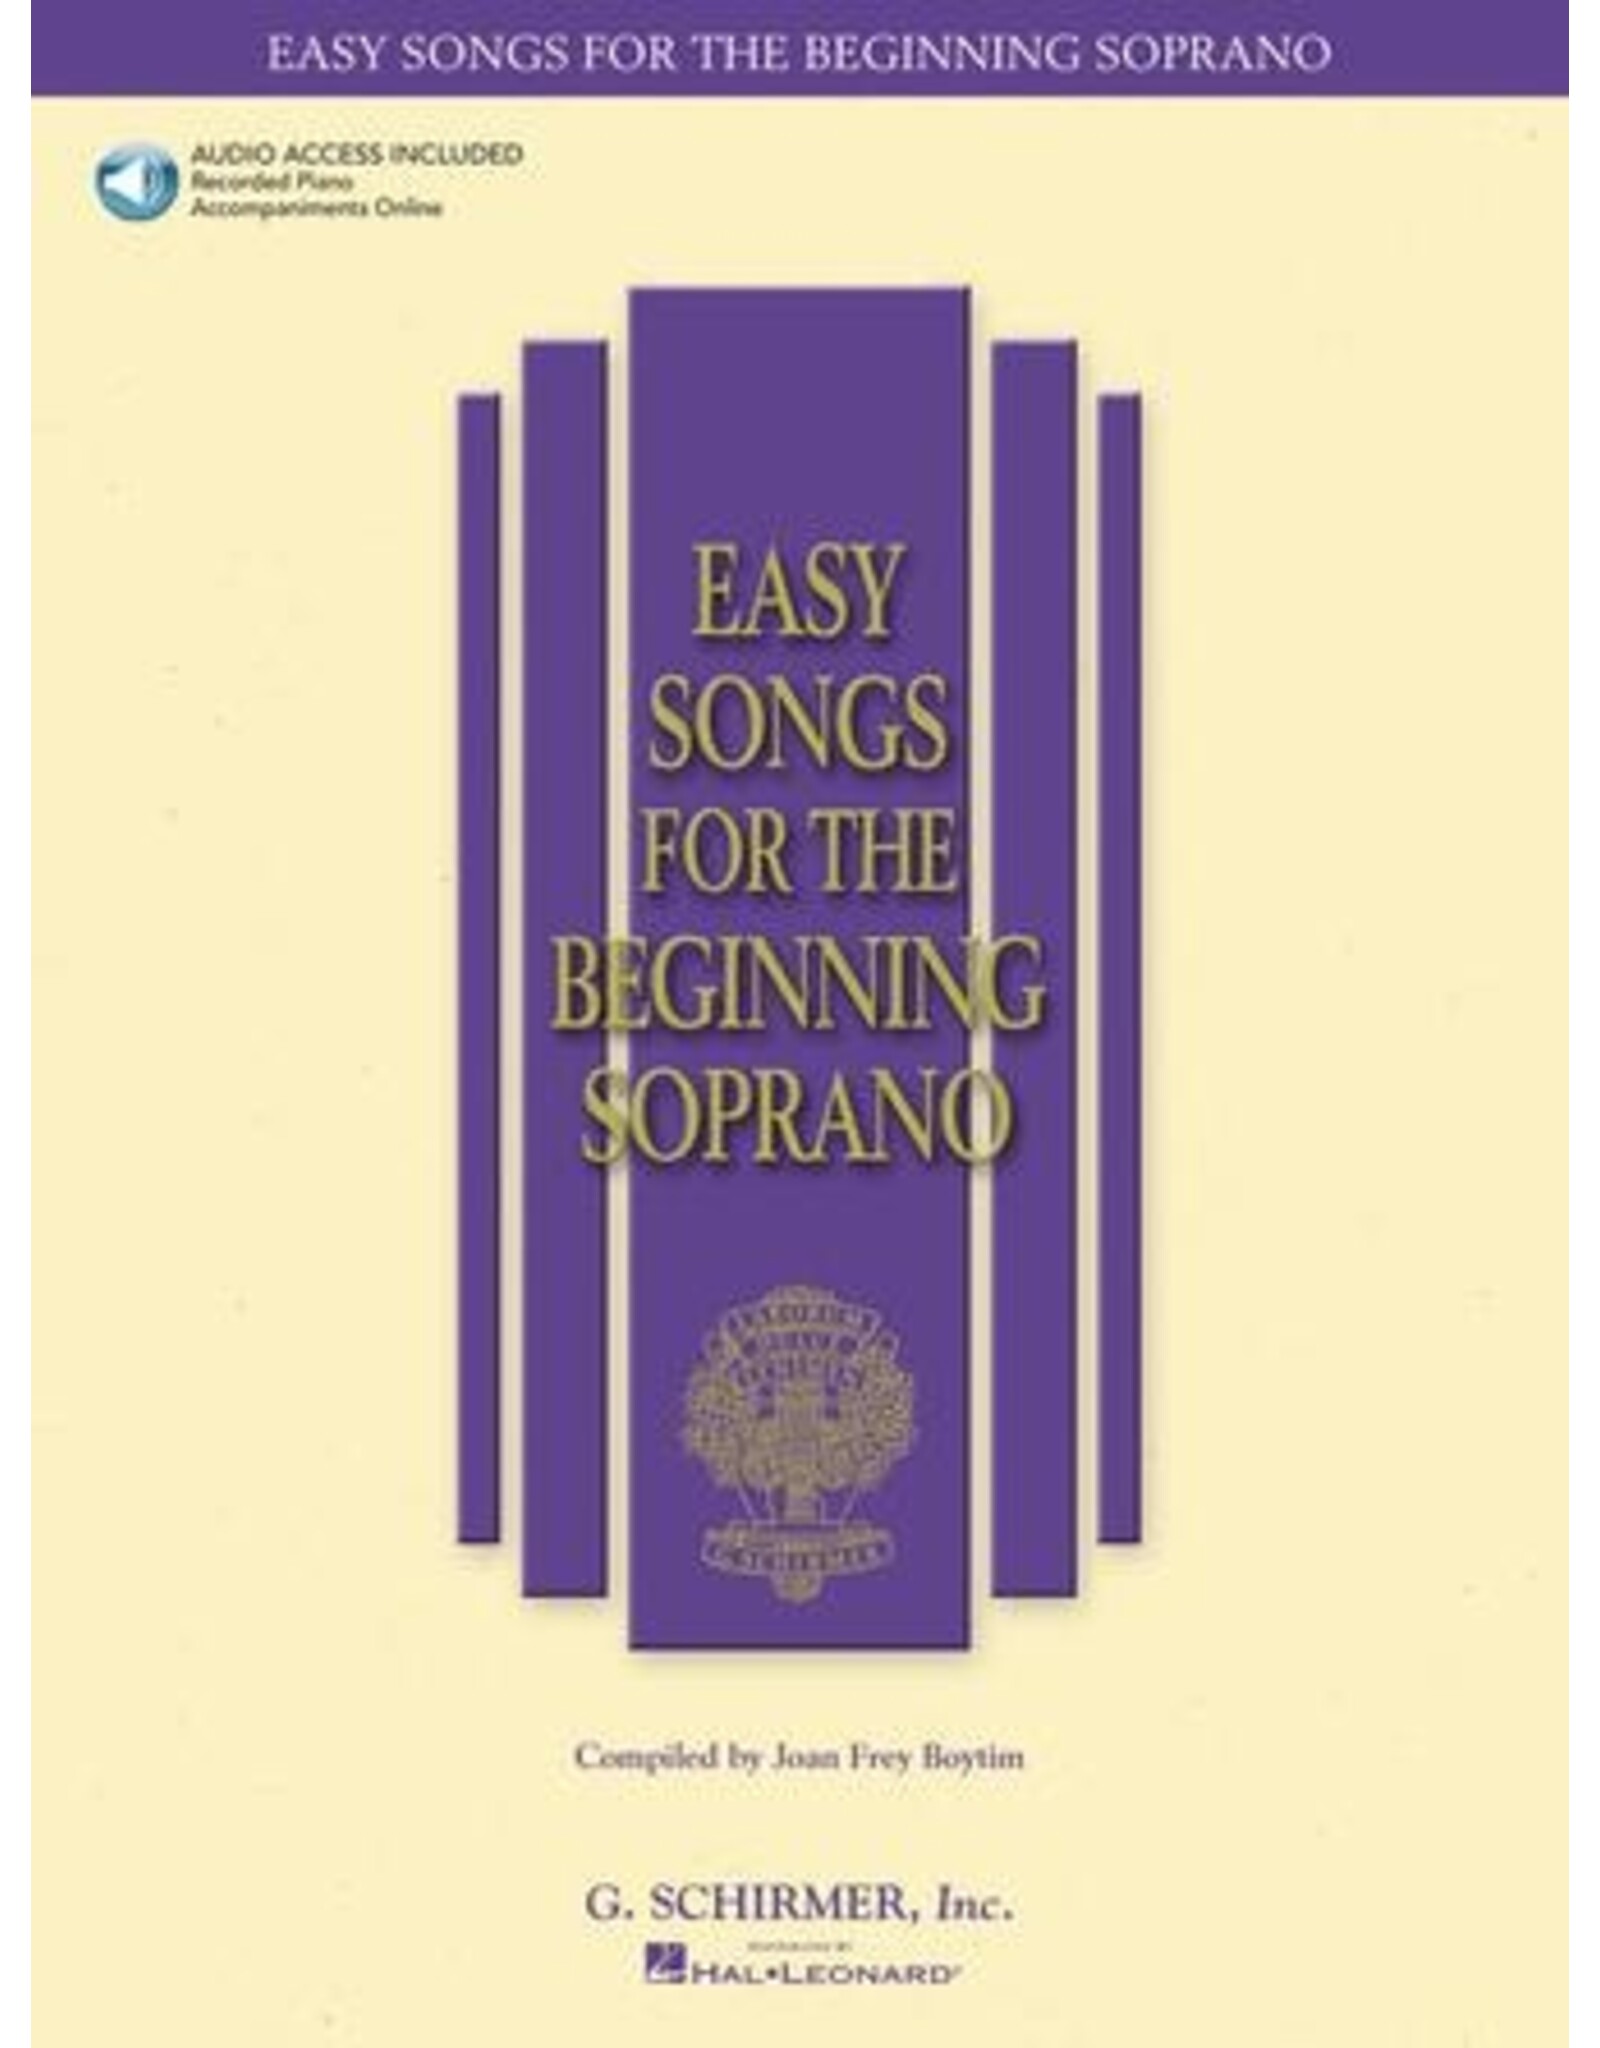 Hal Leonard Easy Songs for the Beginning Soprano With companion recorded piano accompaniments (Joan Frey Boytim) Vocal Collection